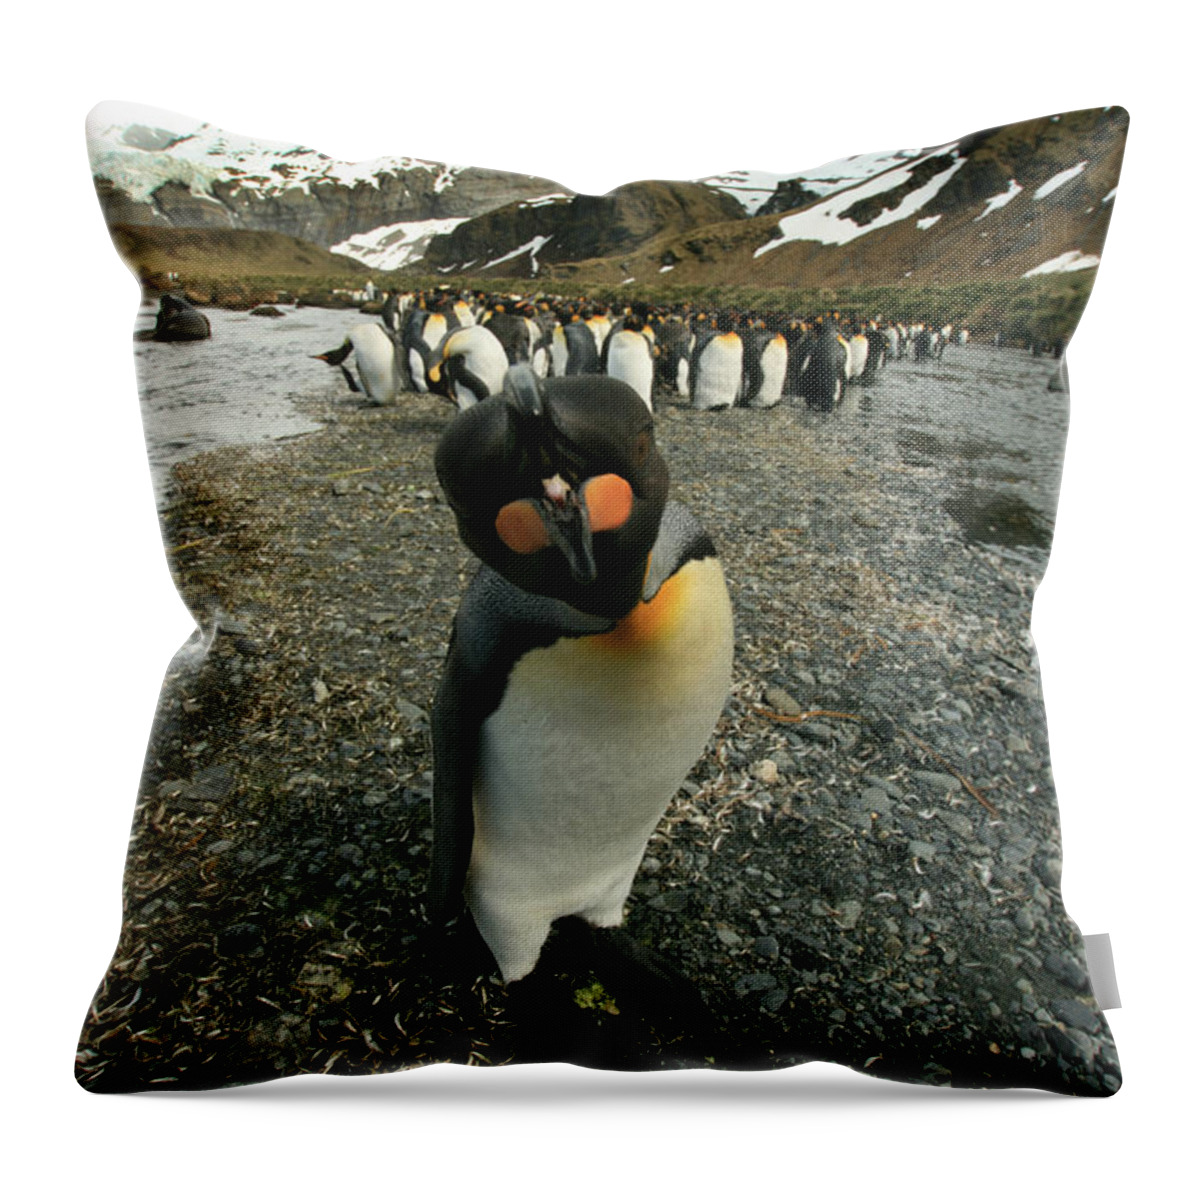 Juvenile King Penguin Throw Pillow featuring the photograph King Penguin #3 by Amanda Stadther